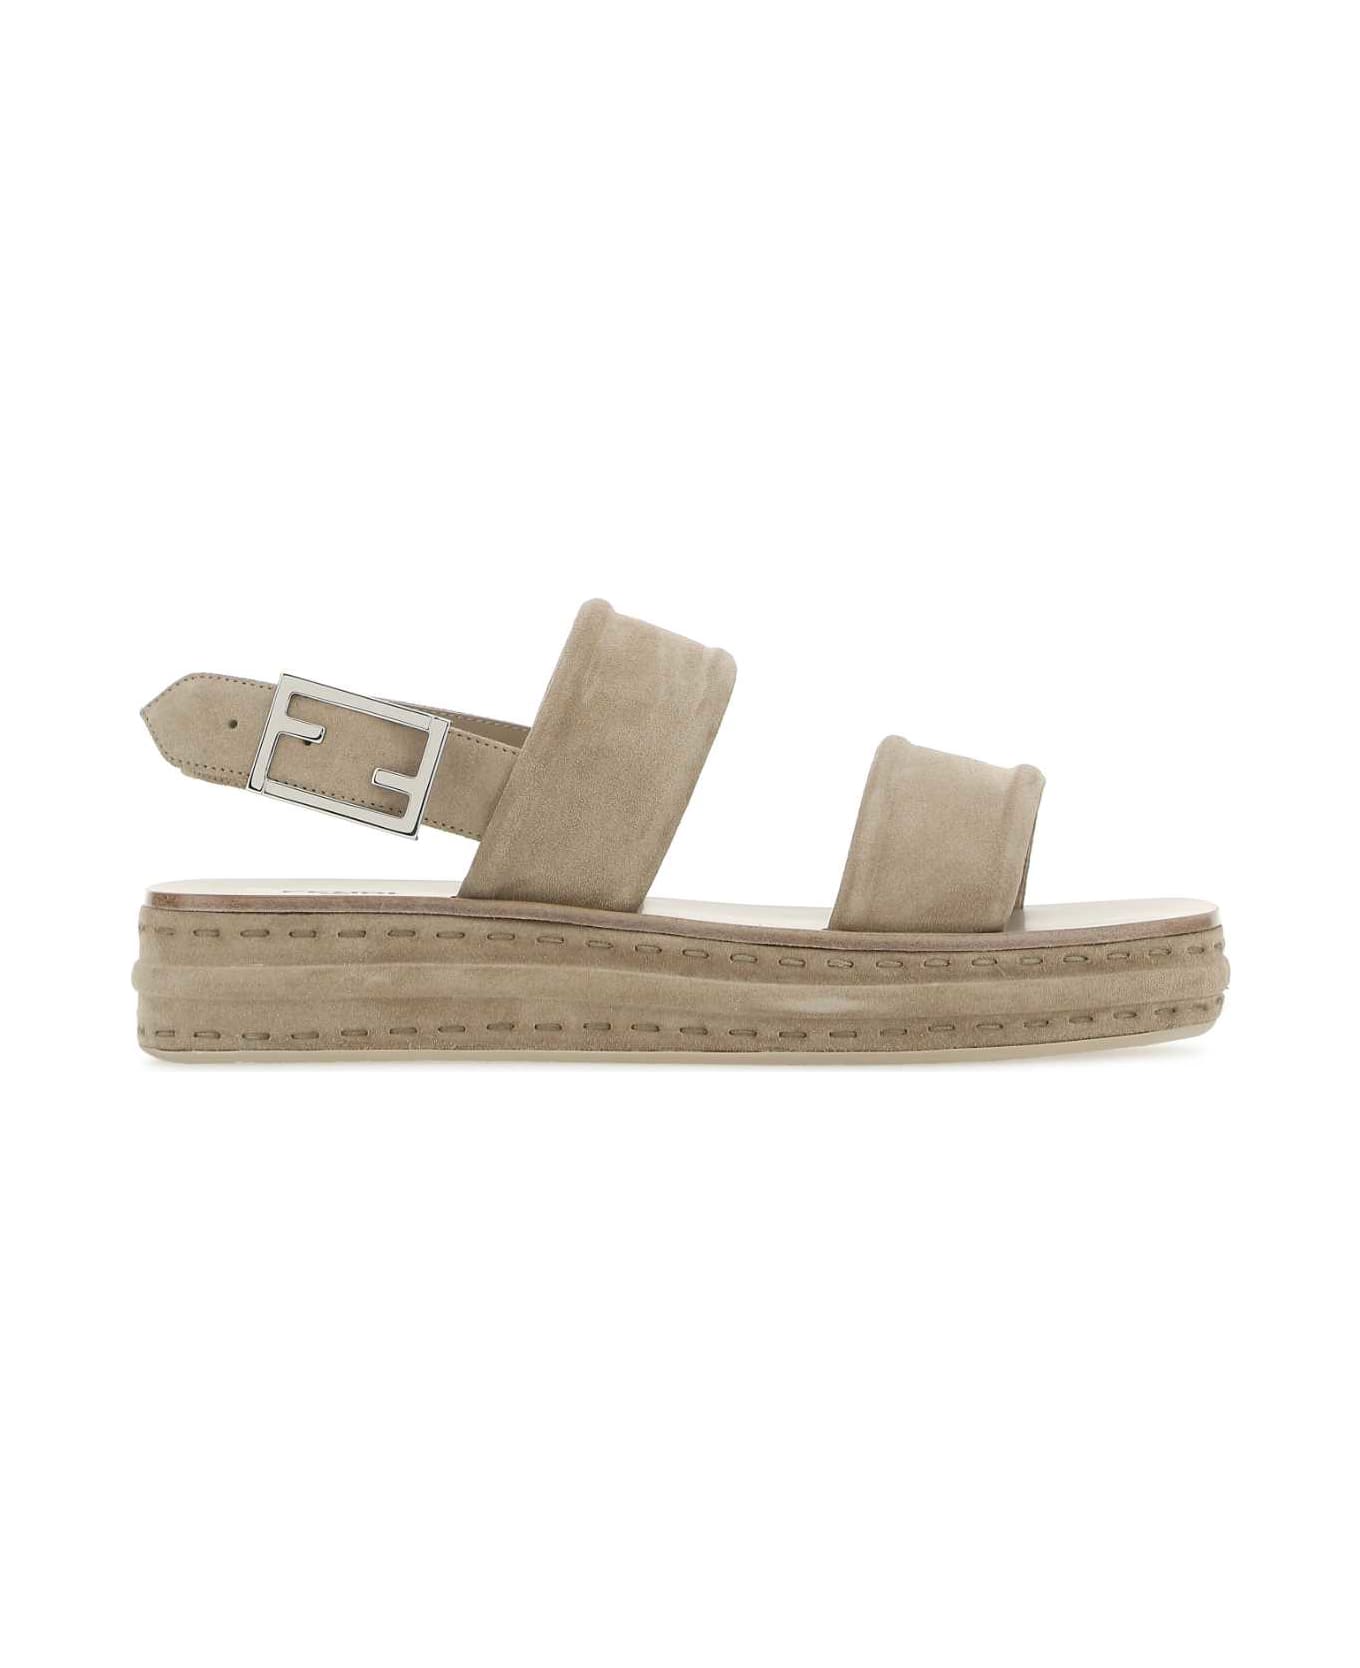 Fendi Cappuccino Suede Sandals - F0EJB その他各種シューズ